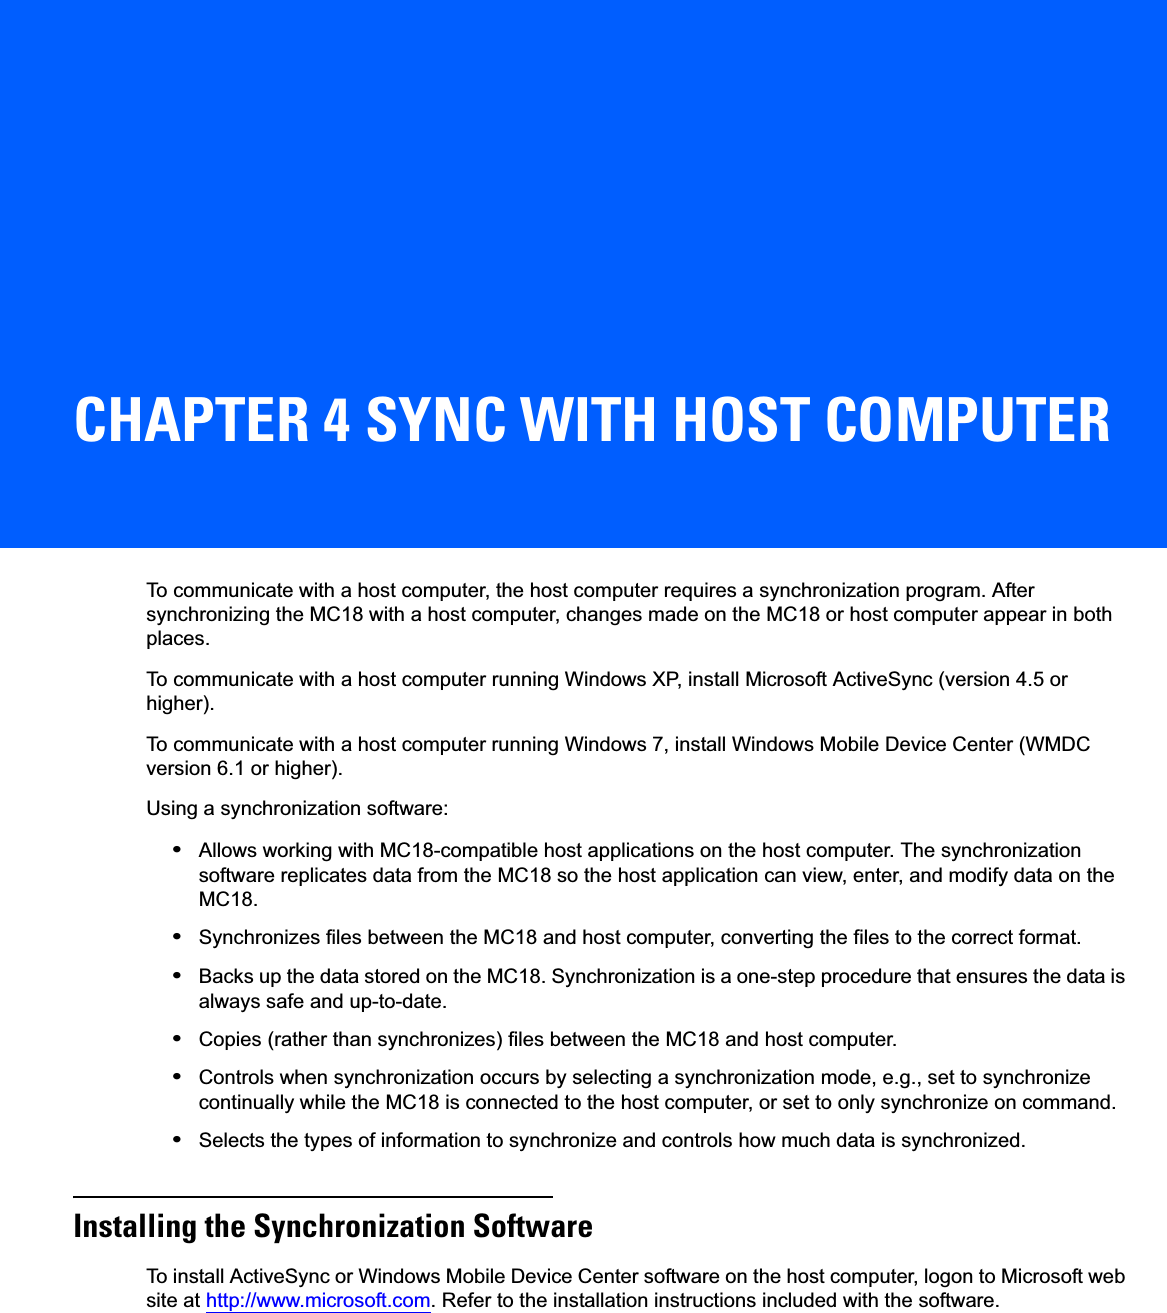 CHAPTER 4 SYNC WITH HOST COMPUTERTo communicate with a host computer, the host computer requires a synchronization program. After synchronizing the MC18 with a host computer, changes made on the MC18 or host computer appear in both places.To communicate with a host computer running Windows XP, install Microsoft ActiveSync (version 4.5 or higher). To communicate with a host computer running Windows 7, install Windows Mobile Device Center (WMDC version 6.1 or higher). Using a synchronization software:•Allows working with MC18-compatible host applications on the host computer. The synchronization software replicates data from the MC18 so the host application can view, enter, and modify data on the MC18.•Synchronizes files between the MC18 and host computer, converting the files to the correct format.•Backs up the data stored on the MC18. Synchronization is a one-step procedure that ensures the data is always safe and up-to-date.•Copies (rather than synchronizes) files between the MC18 and host computer.•Controls when synchronization occurs by selecting a synchronization mode, e.g., set to synchronize continually while the MC18 is connected to the host computer, or set to only synchronize on command.•Selects the types of information to synchronize and controls how much data is synchronized.Installing the Synchronization SoftwareTo install ActiveSync or Windows Mobile Device Center software on the host computer, logon to Microsoft web site at http://www.microsoft.com. Refer to the installation instructions included with the software.